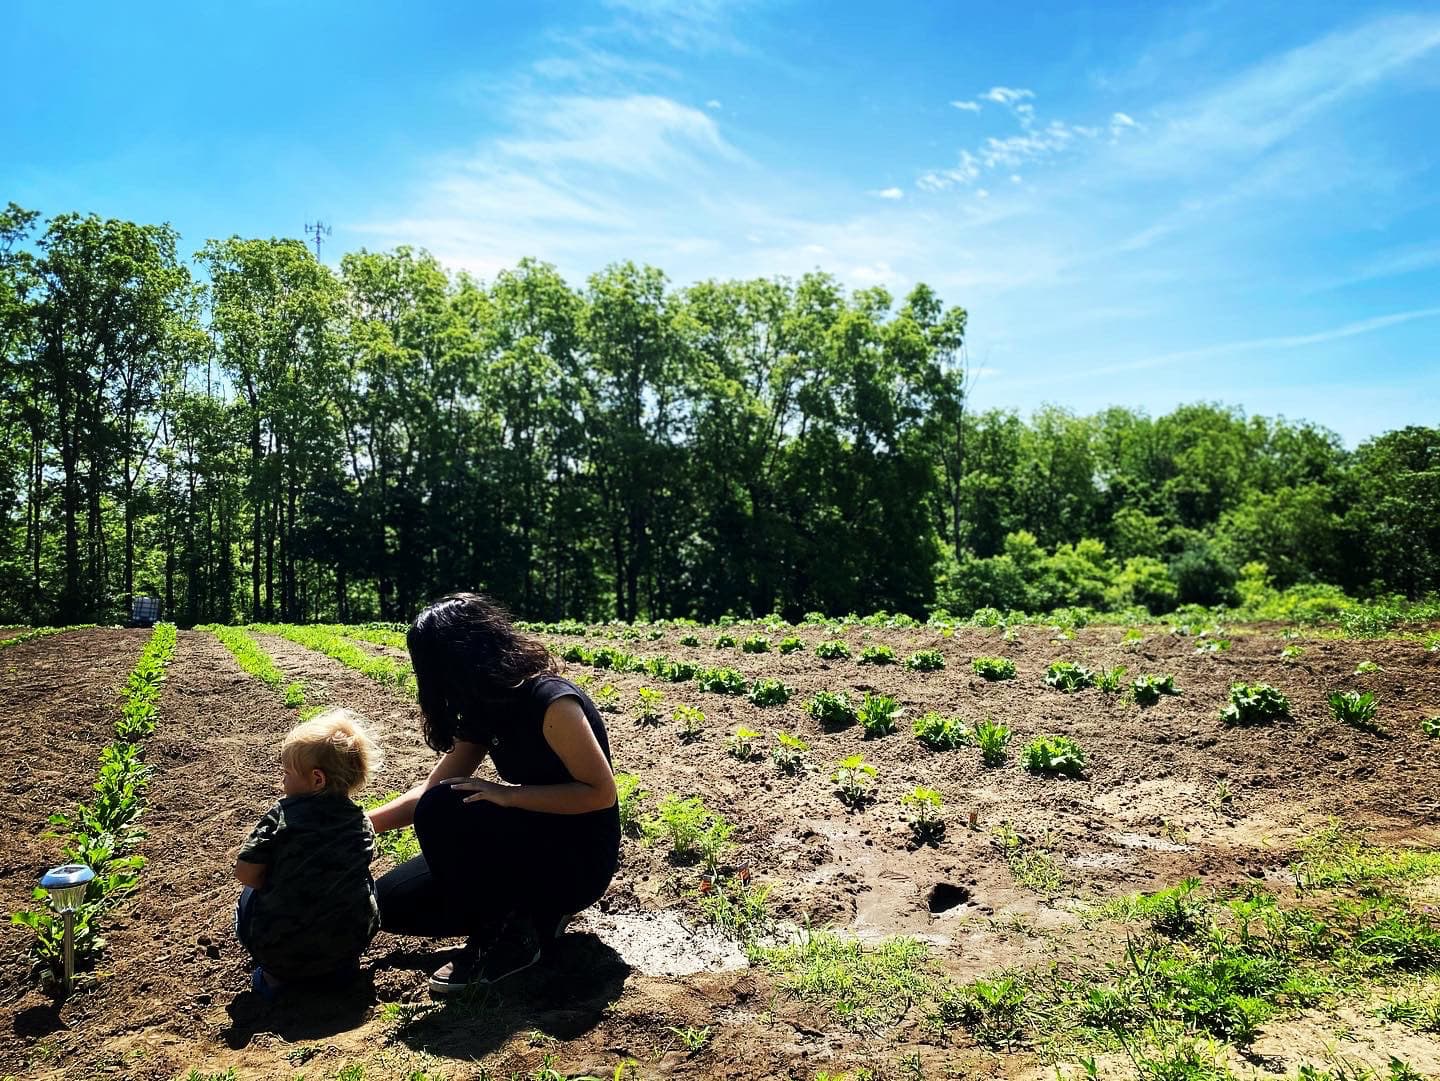 A woman and a child crouch in a field, harvesting vegetables.